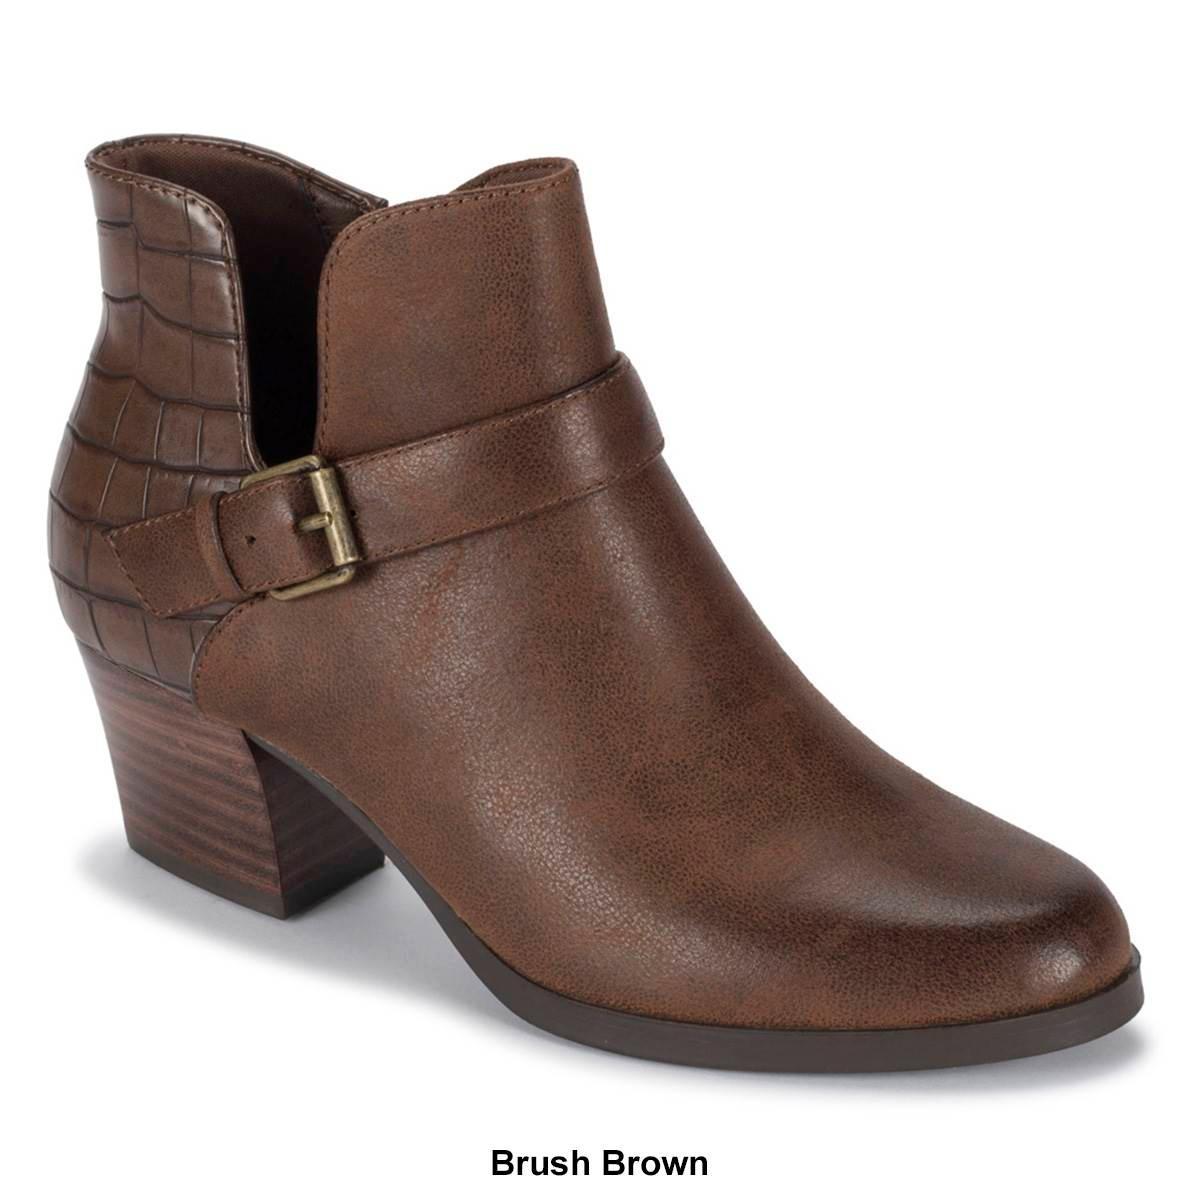 Baretraps Lexis Womens Block Heel Ankle Boots Brown Product Image